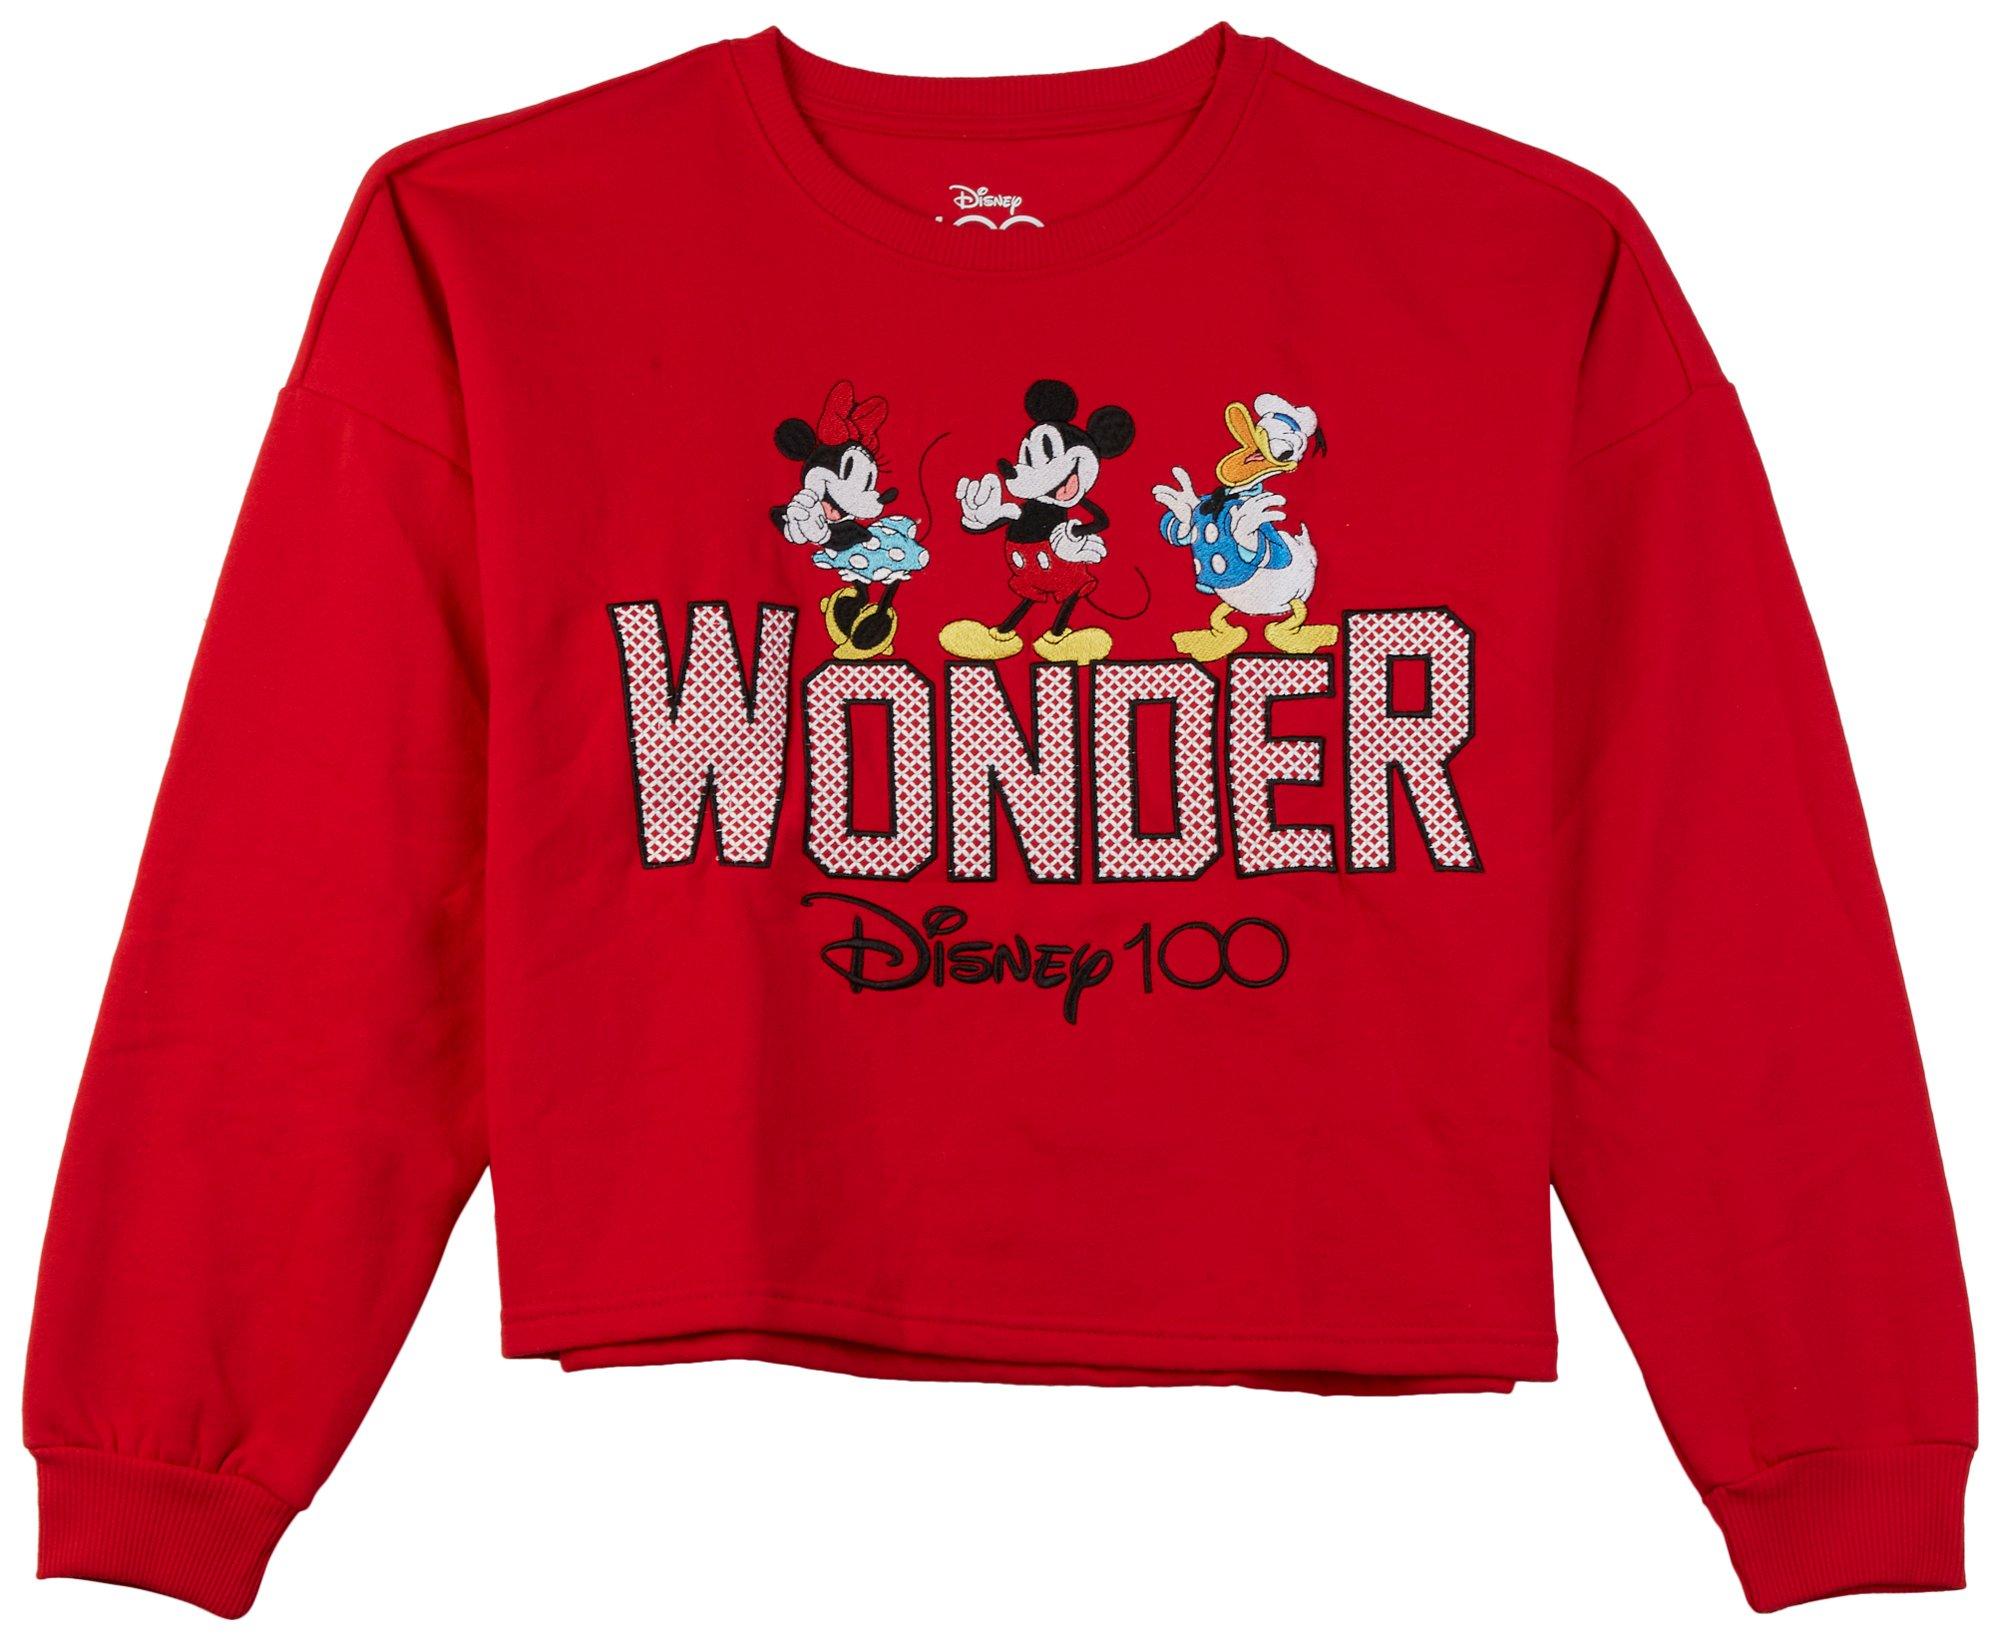 Juniors Embroidered Disney 100 Long Sleeve Sweater